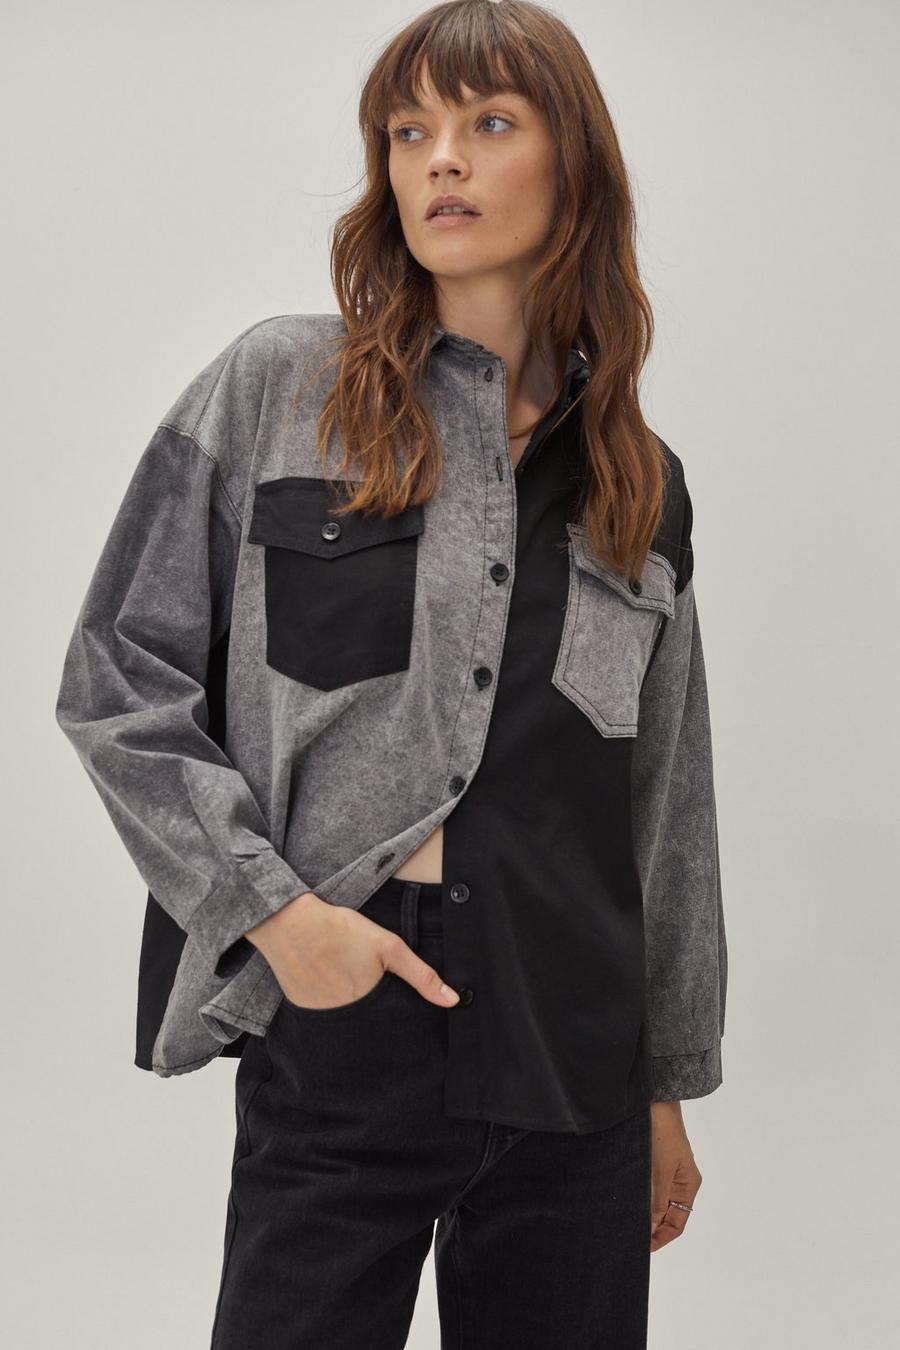 Mixed Messages Two-Tone Denim Shirt